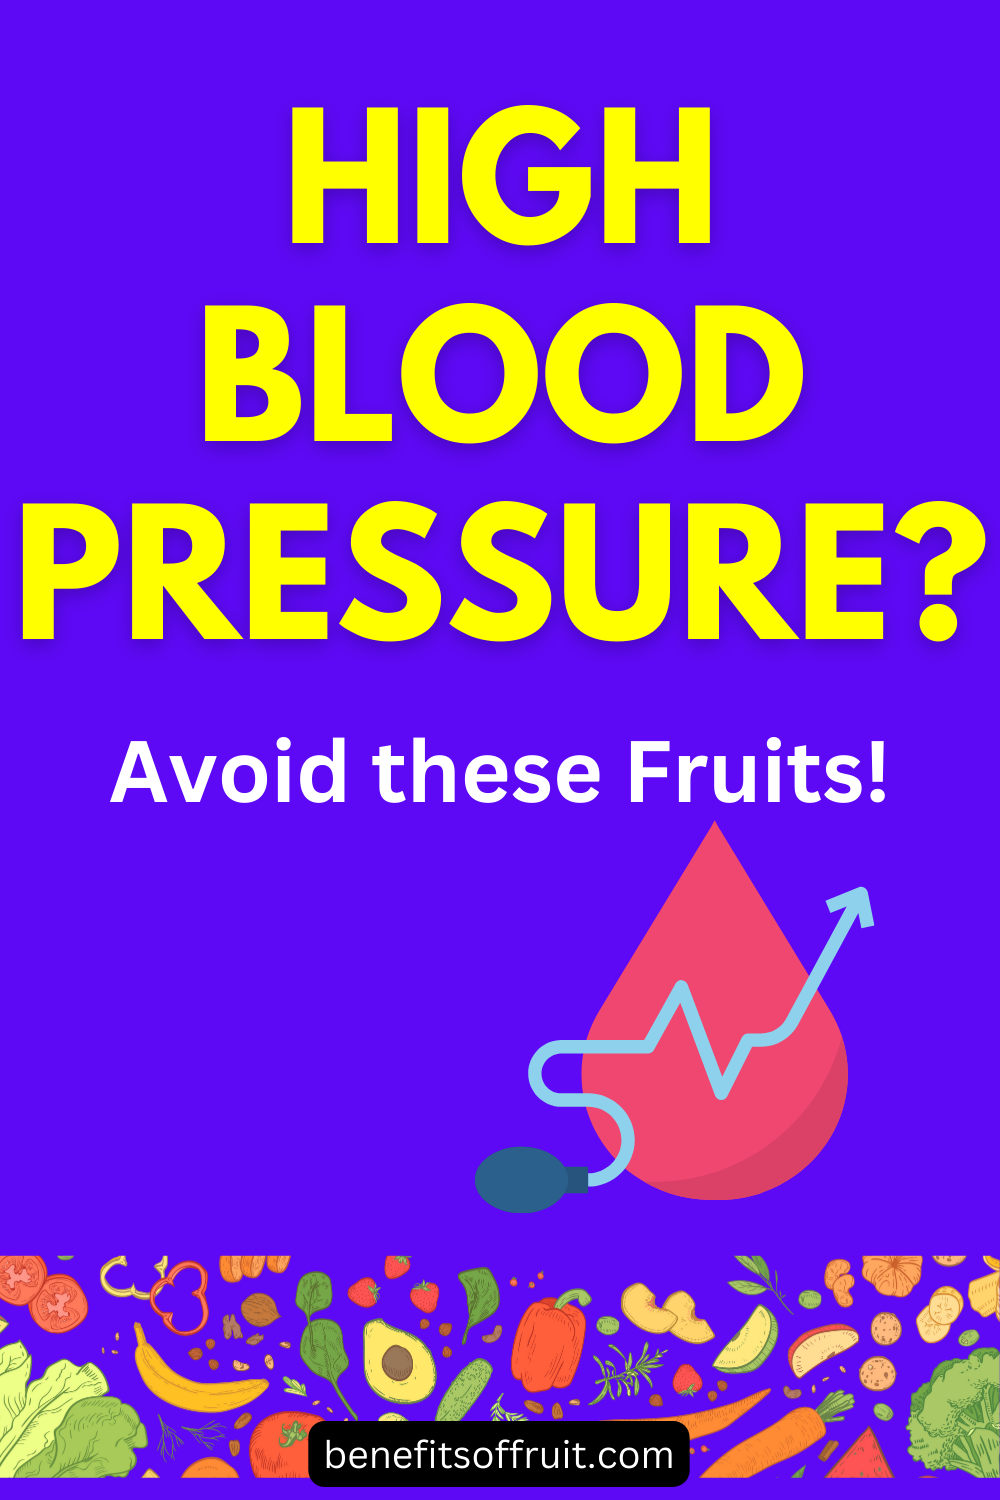 Fruits to Eat and Avoid in High Blood Pressure